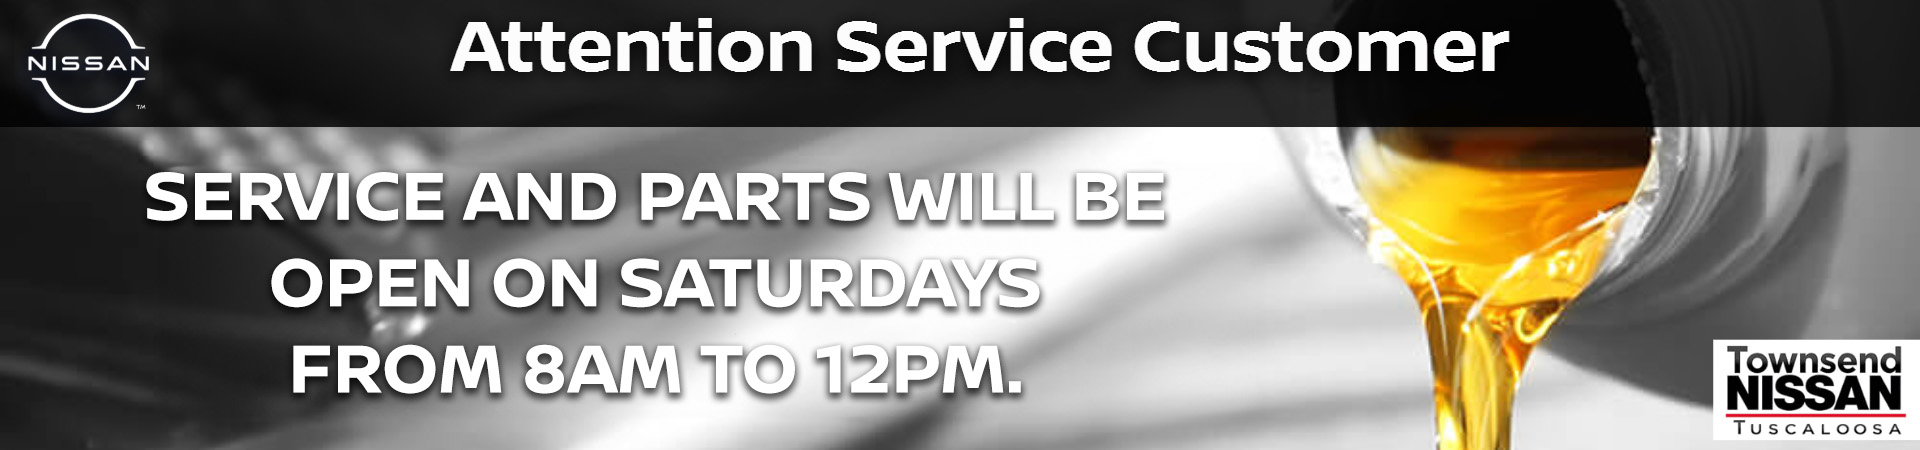 Attention Service Customers